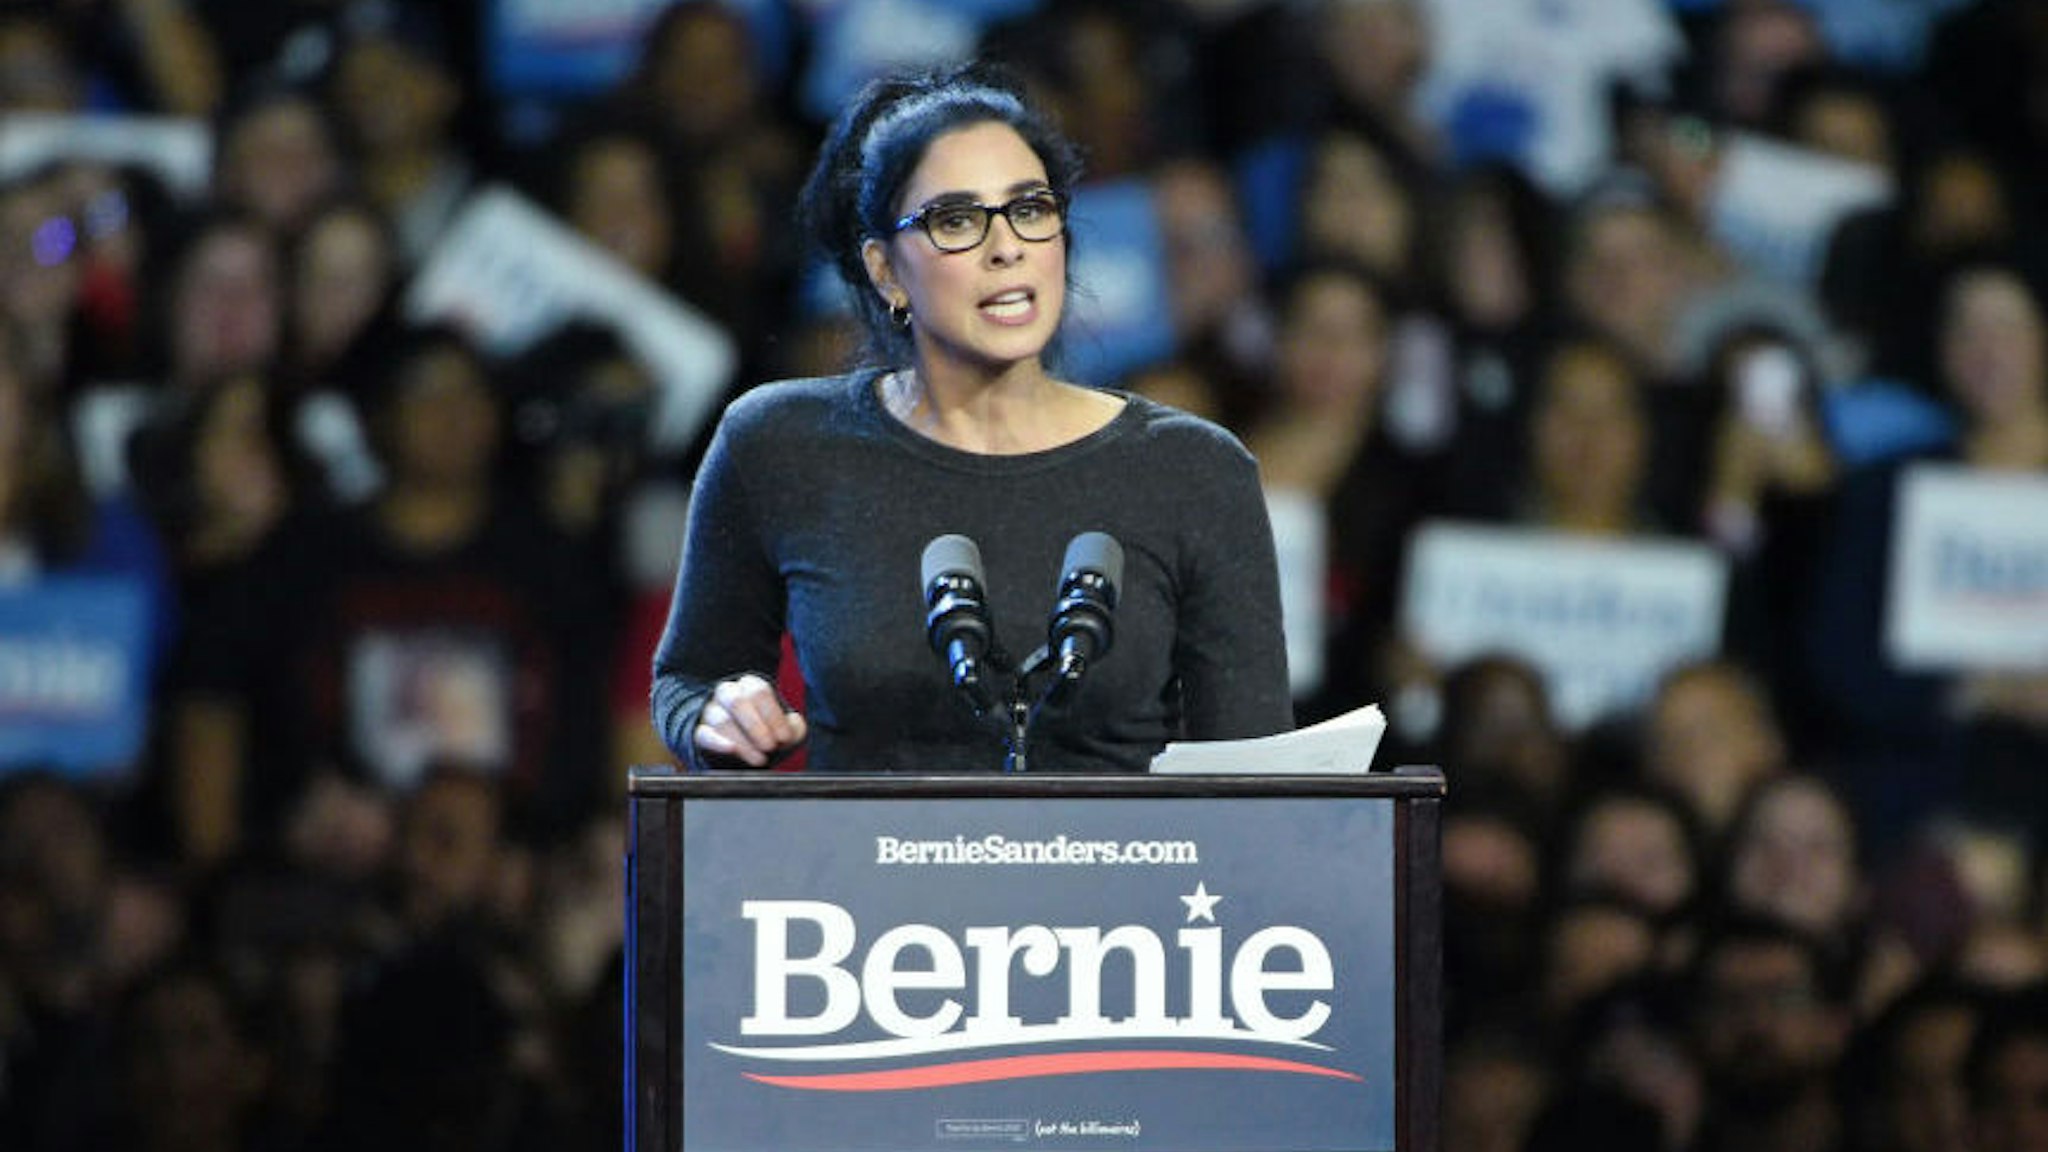 Actor Sarah Silverman speaks at a Bernie Sanders 2020 presidential campaign rally at Los Angeles Convention Center on March 01, 2020 in Los Angeles, California. (Photo by Michael Tullberg/Getty Images)